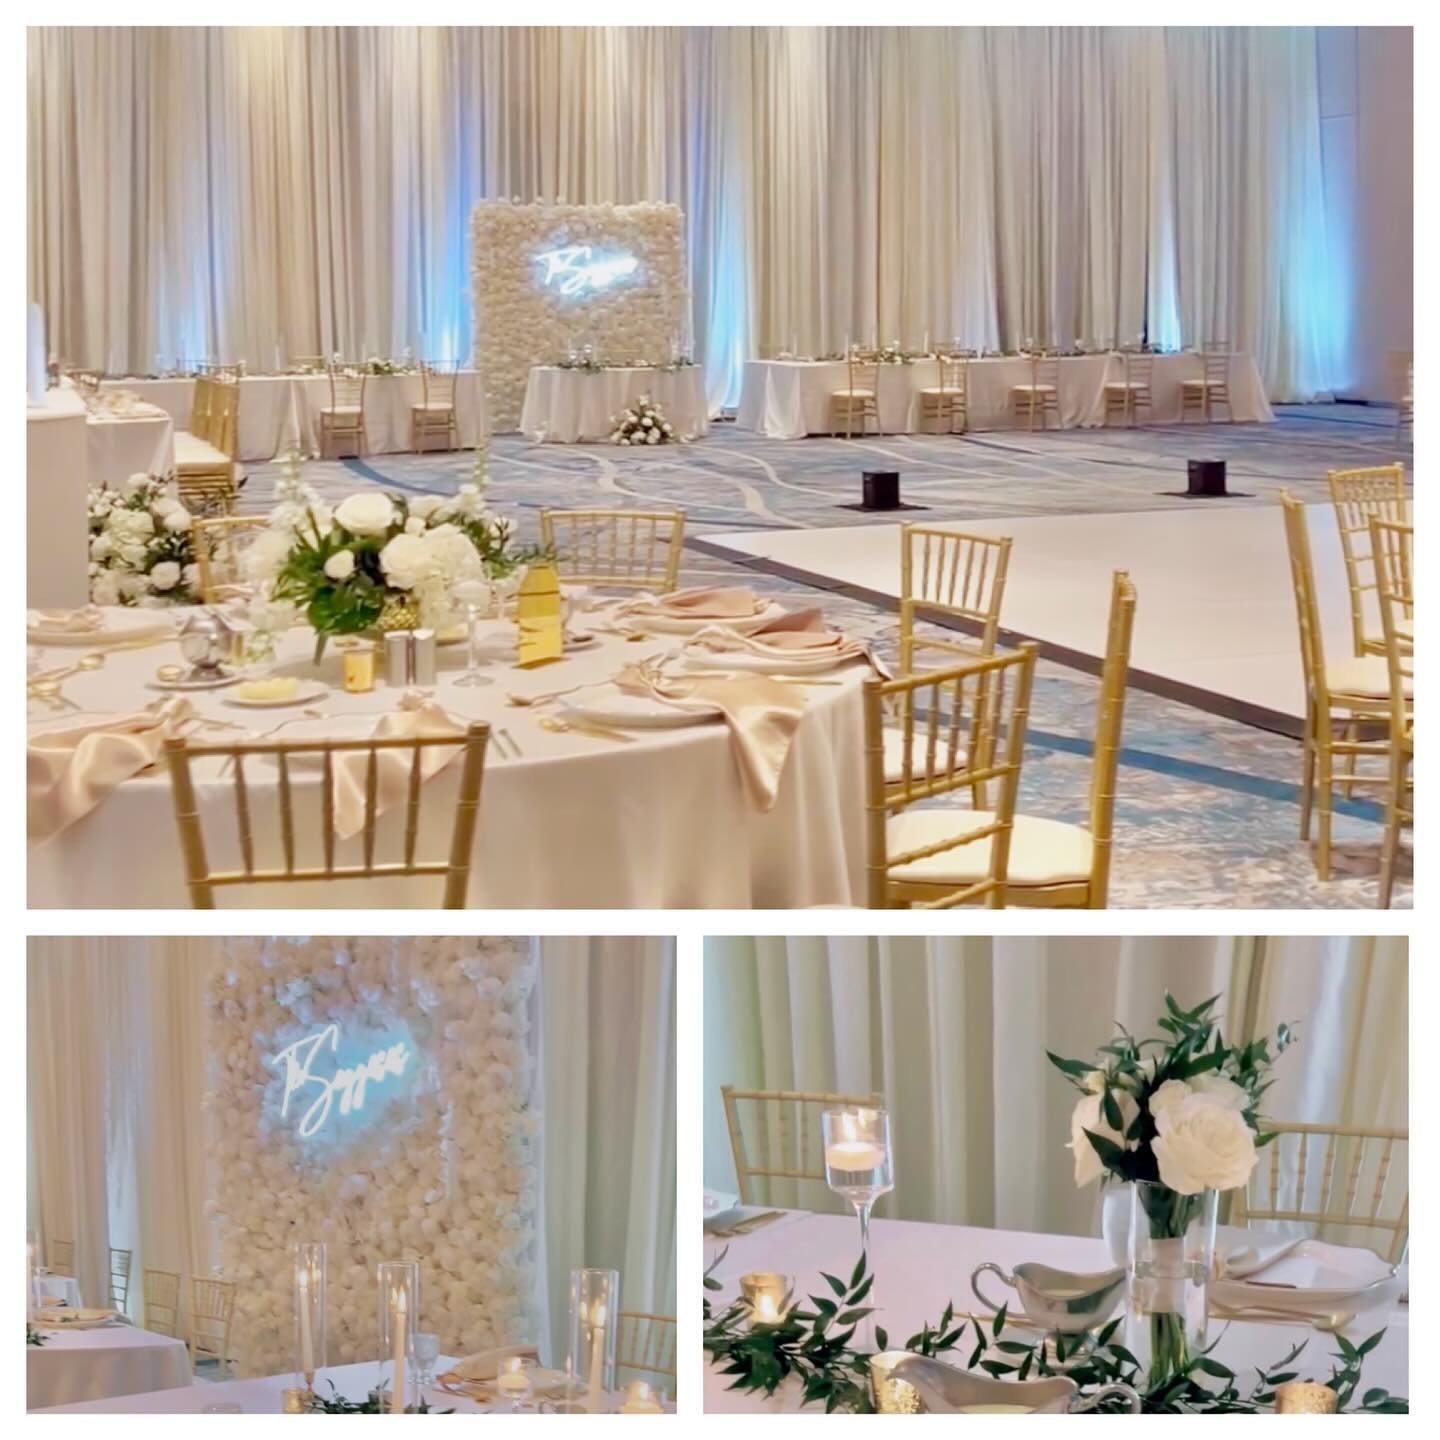 Wedding at the Hilton Tampa Downtown. We provided the Wall Draping, Gold Chiavari Chairs, &amp; Up Lights. Pleasure working with Wildermind Events, Oak &amp; Ash Events, Save The Date Florida, Linens by the Sea, Lavish Backdrops, &amp; Midnight Rider